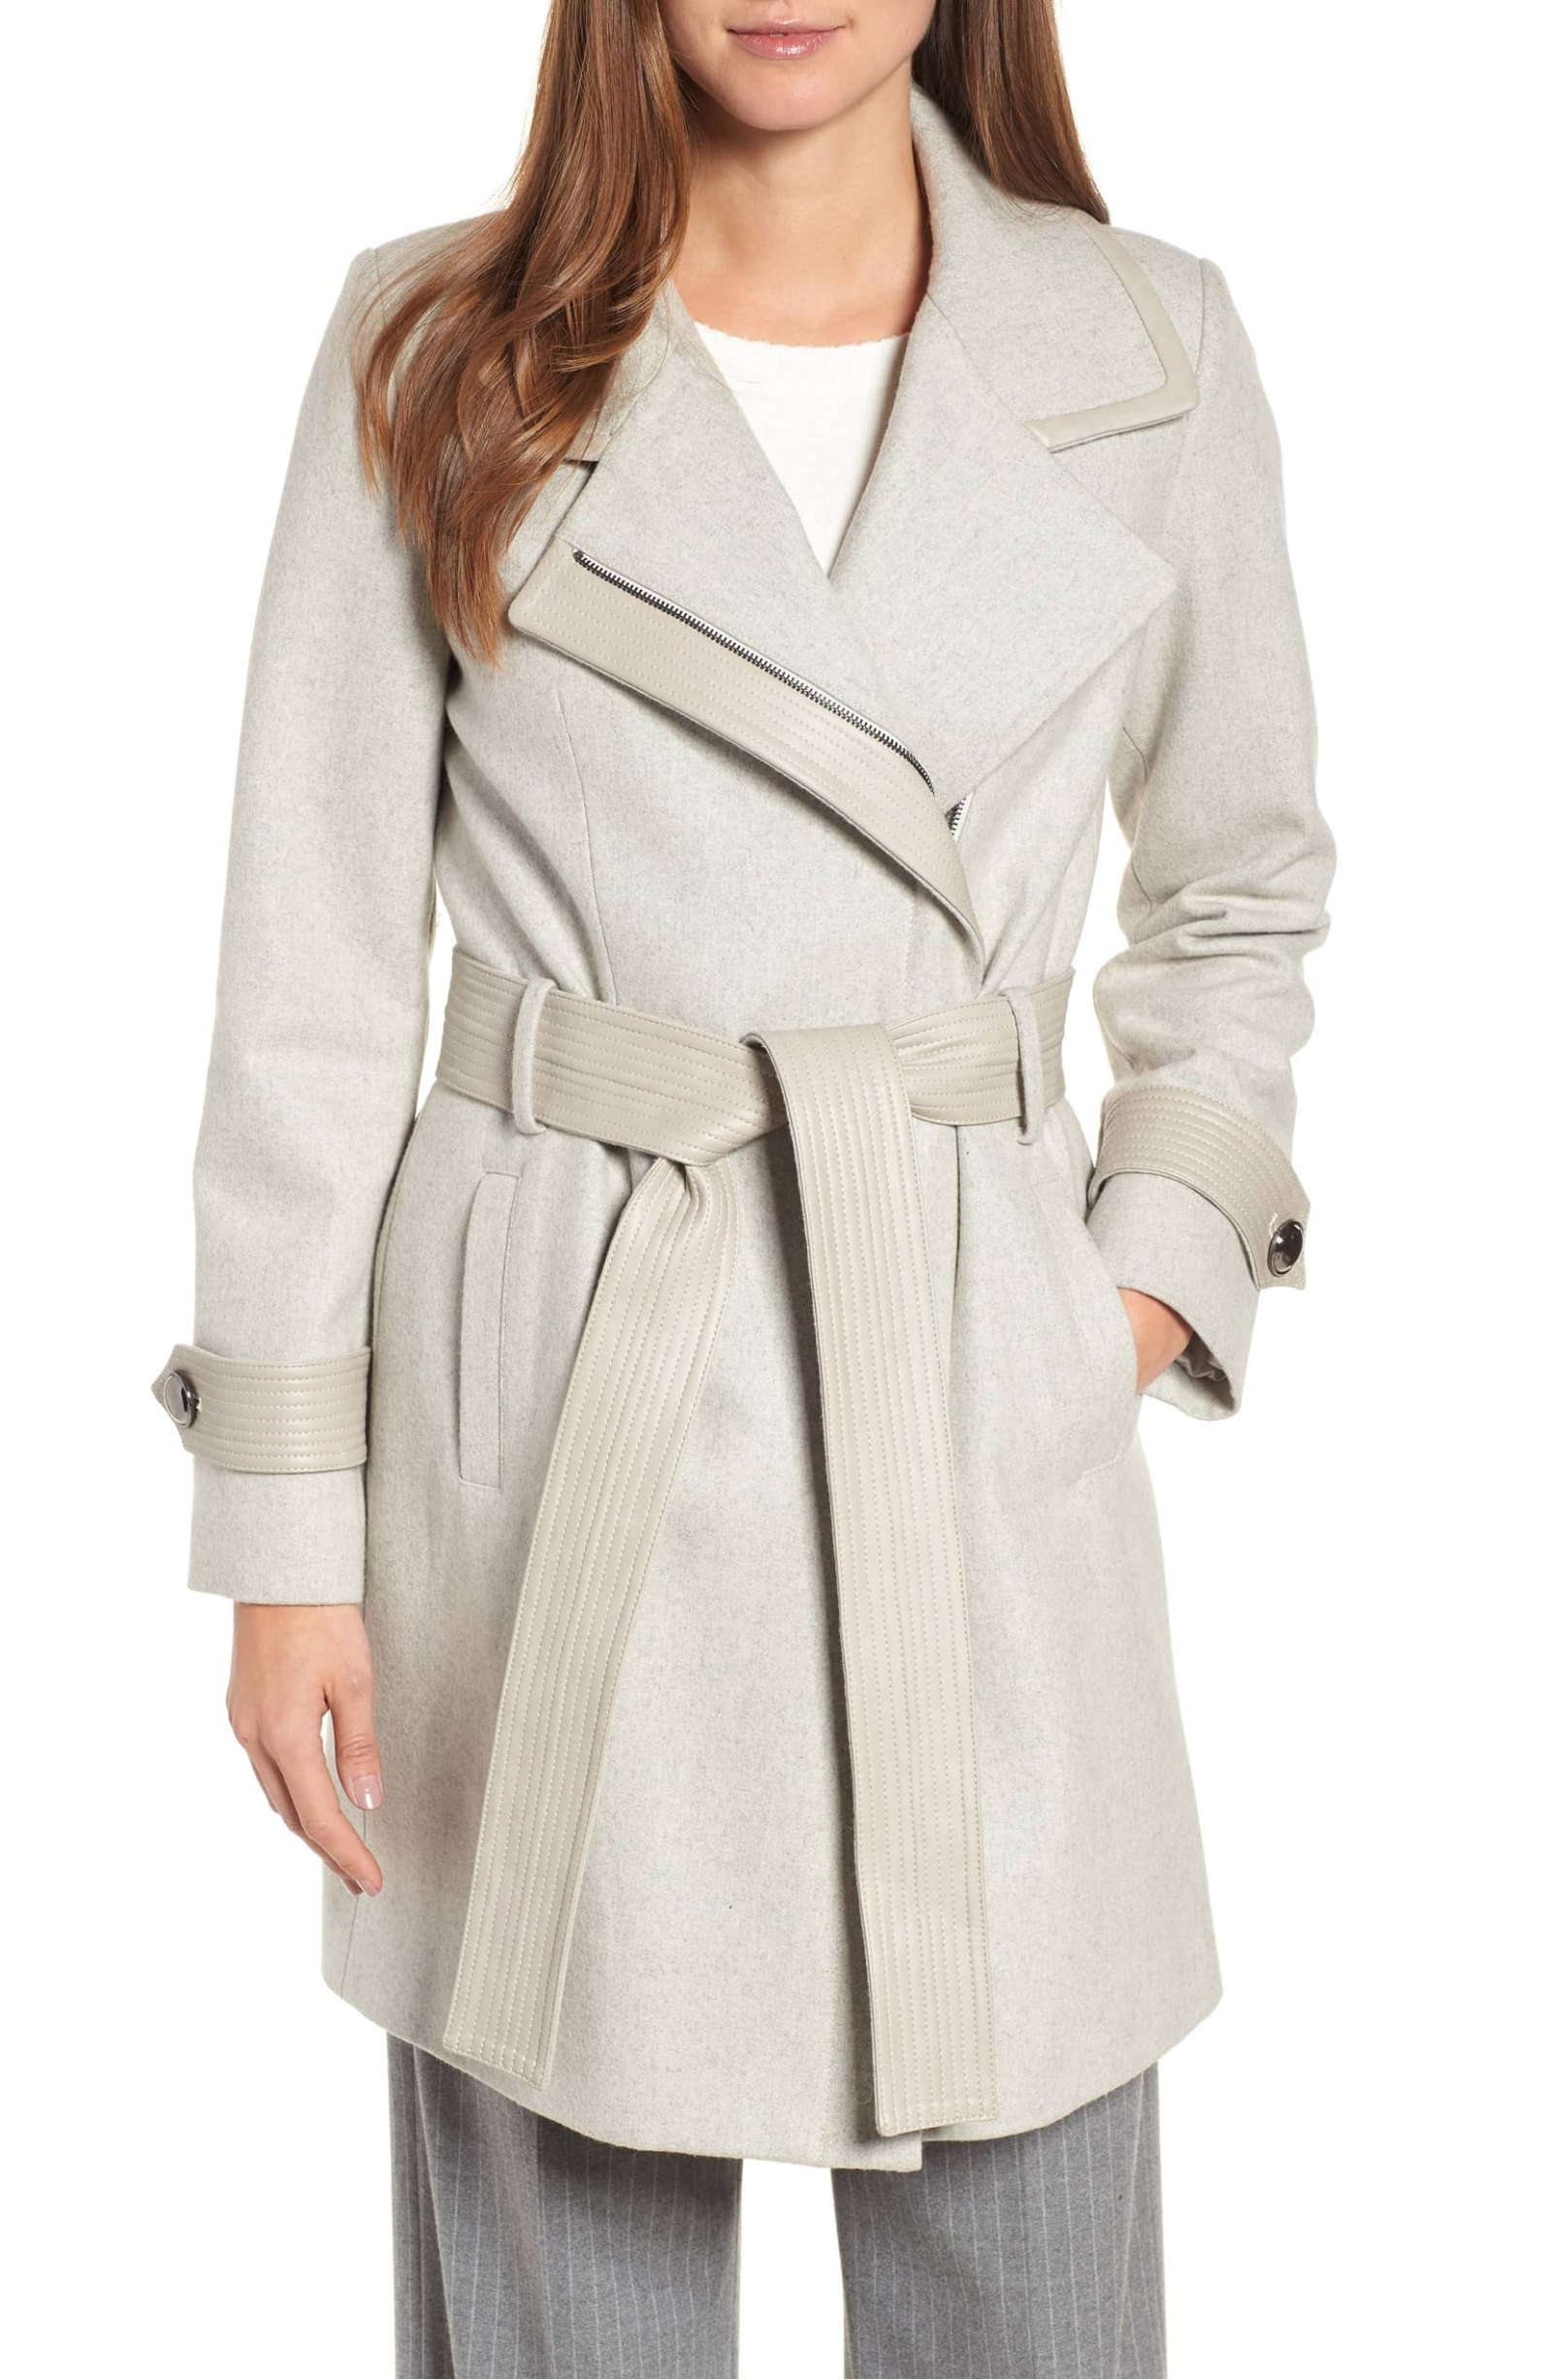 Brave Cold Weather in Style in This Badgley Mischka Coat